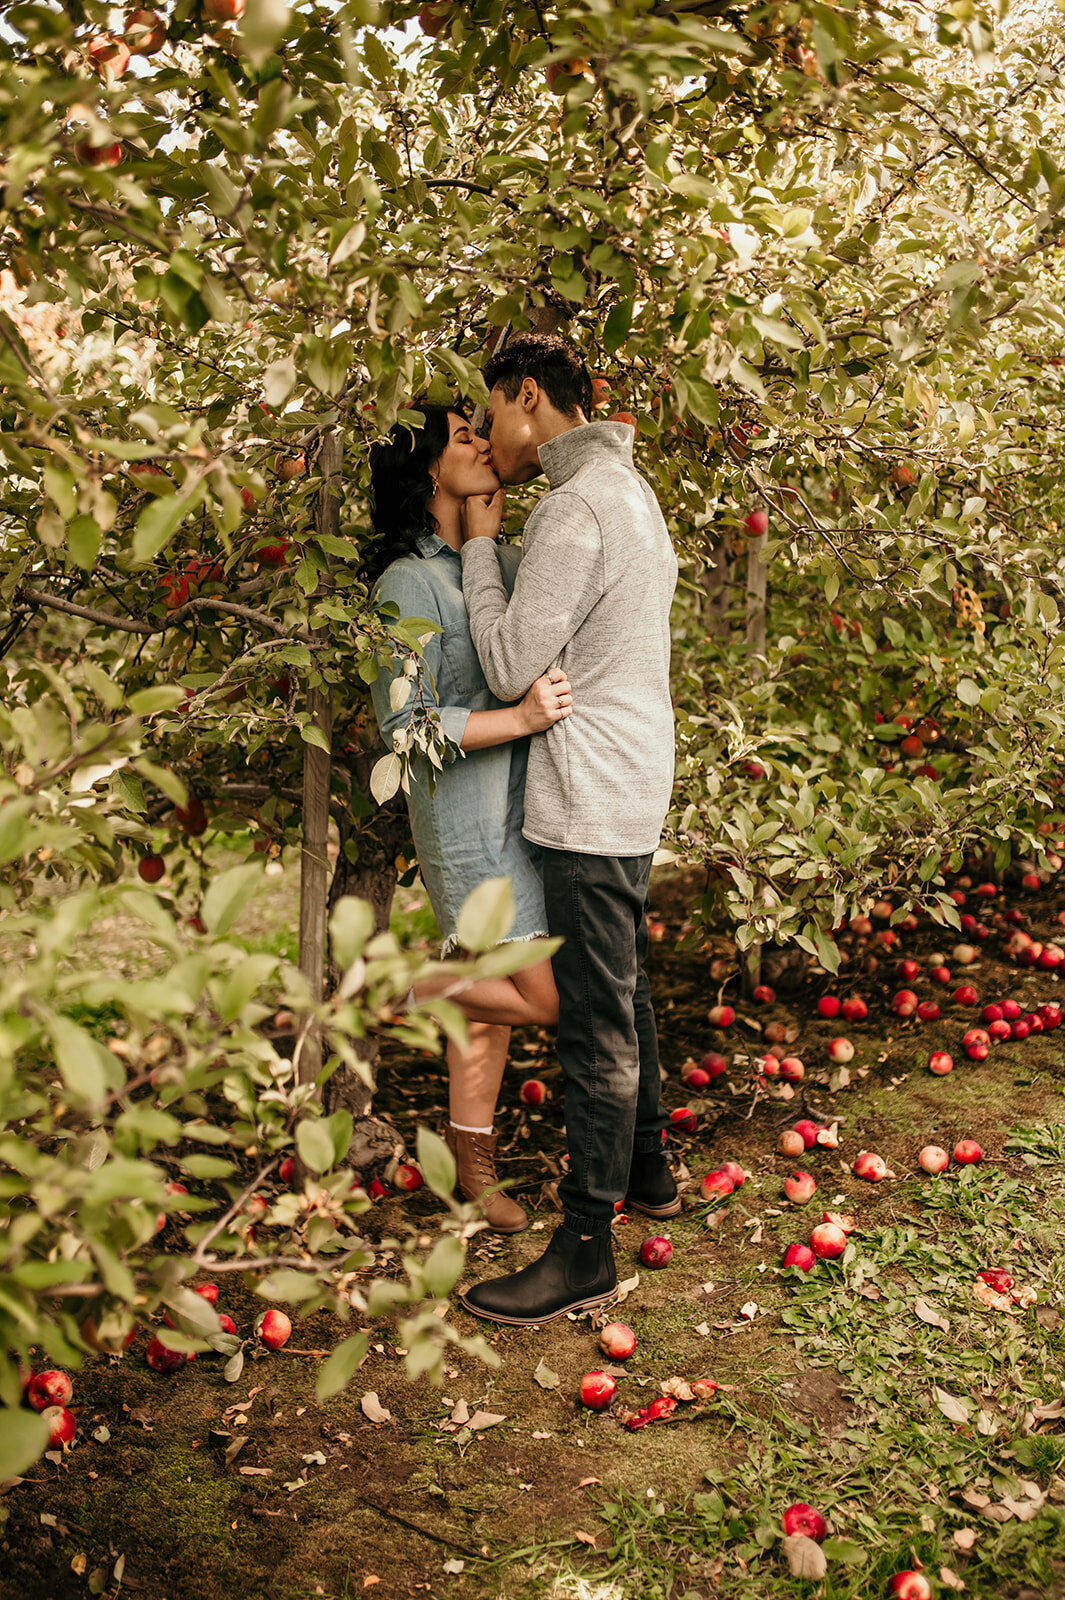 Man kissing woman in apple orchard